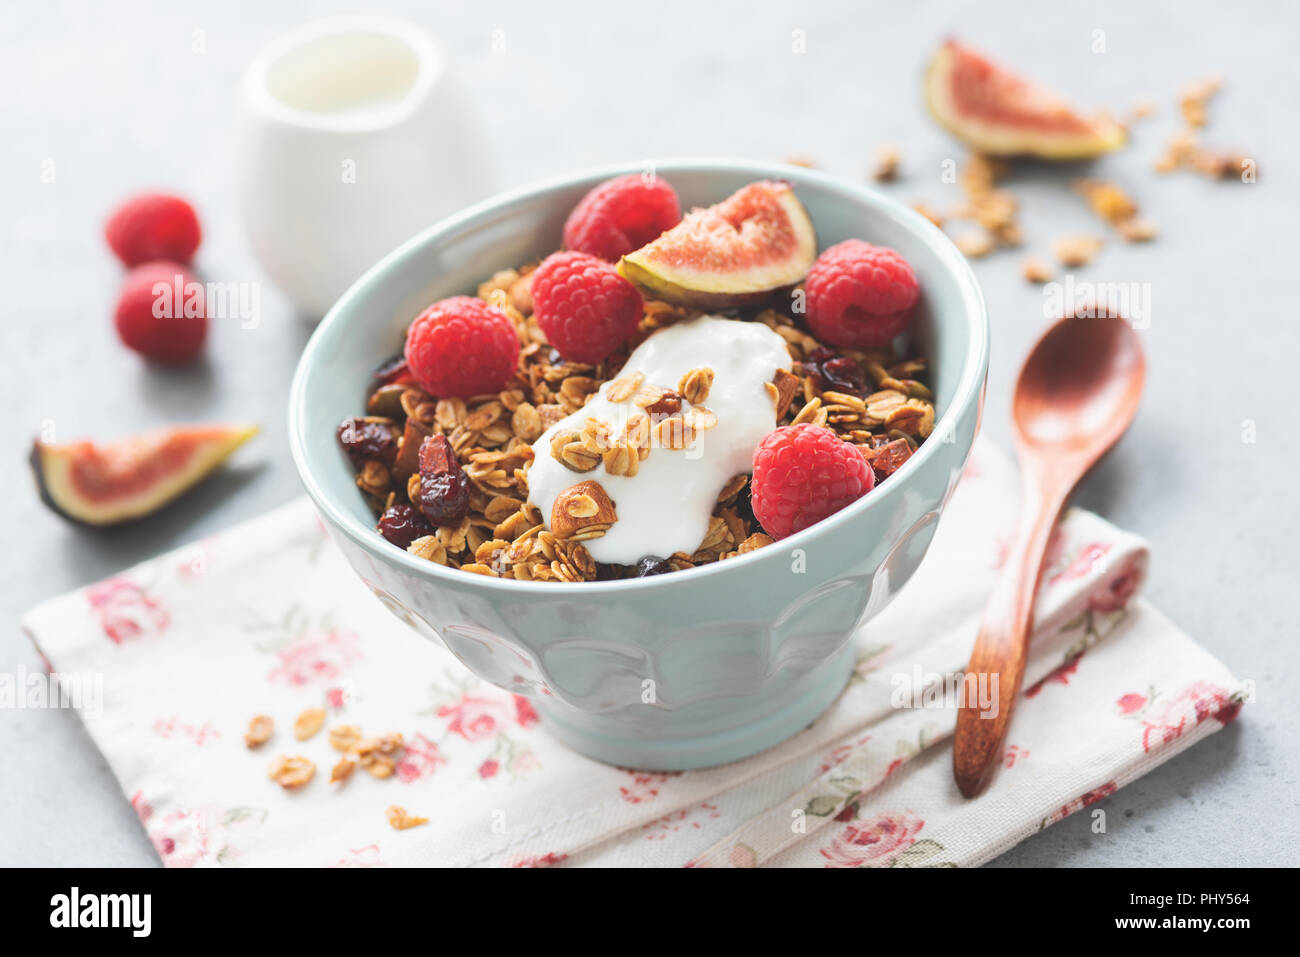 Crunchy granola with greek yogurt and fruits in a bowl. Closeup view, selective focus. Toned image. Healthy eating, healthy lifestyle concept Stock Photo